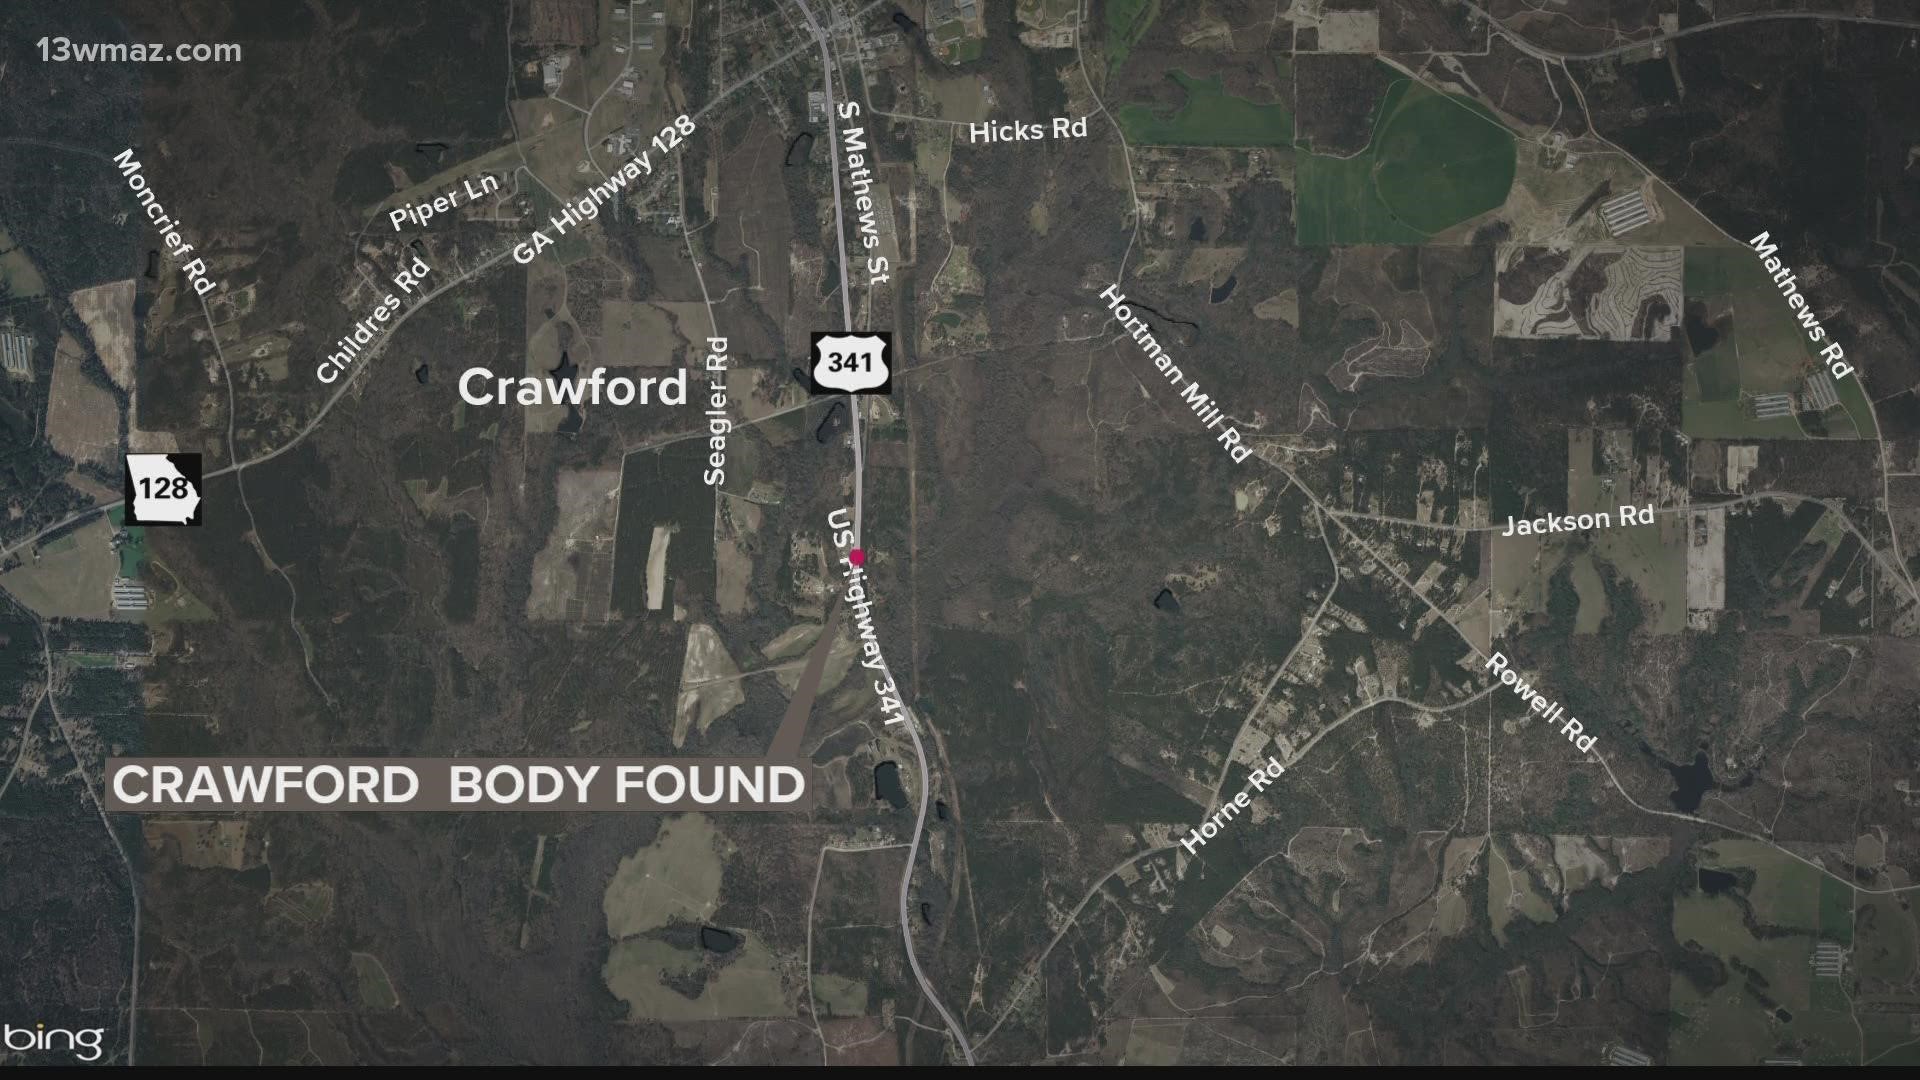 The body was discovered just after 2:30 p.m. on Tuesday. The GBI is helping in the investigation along with other agencies to identify the man.